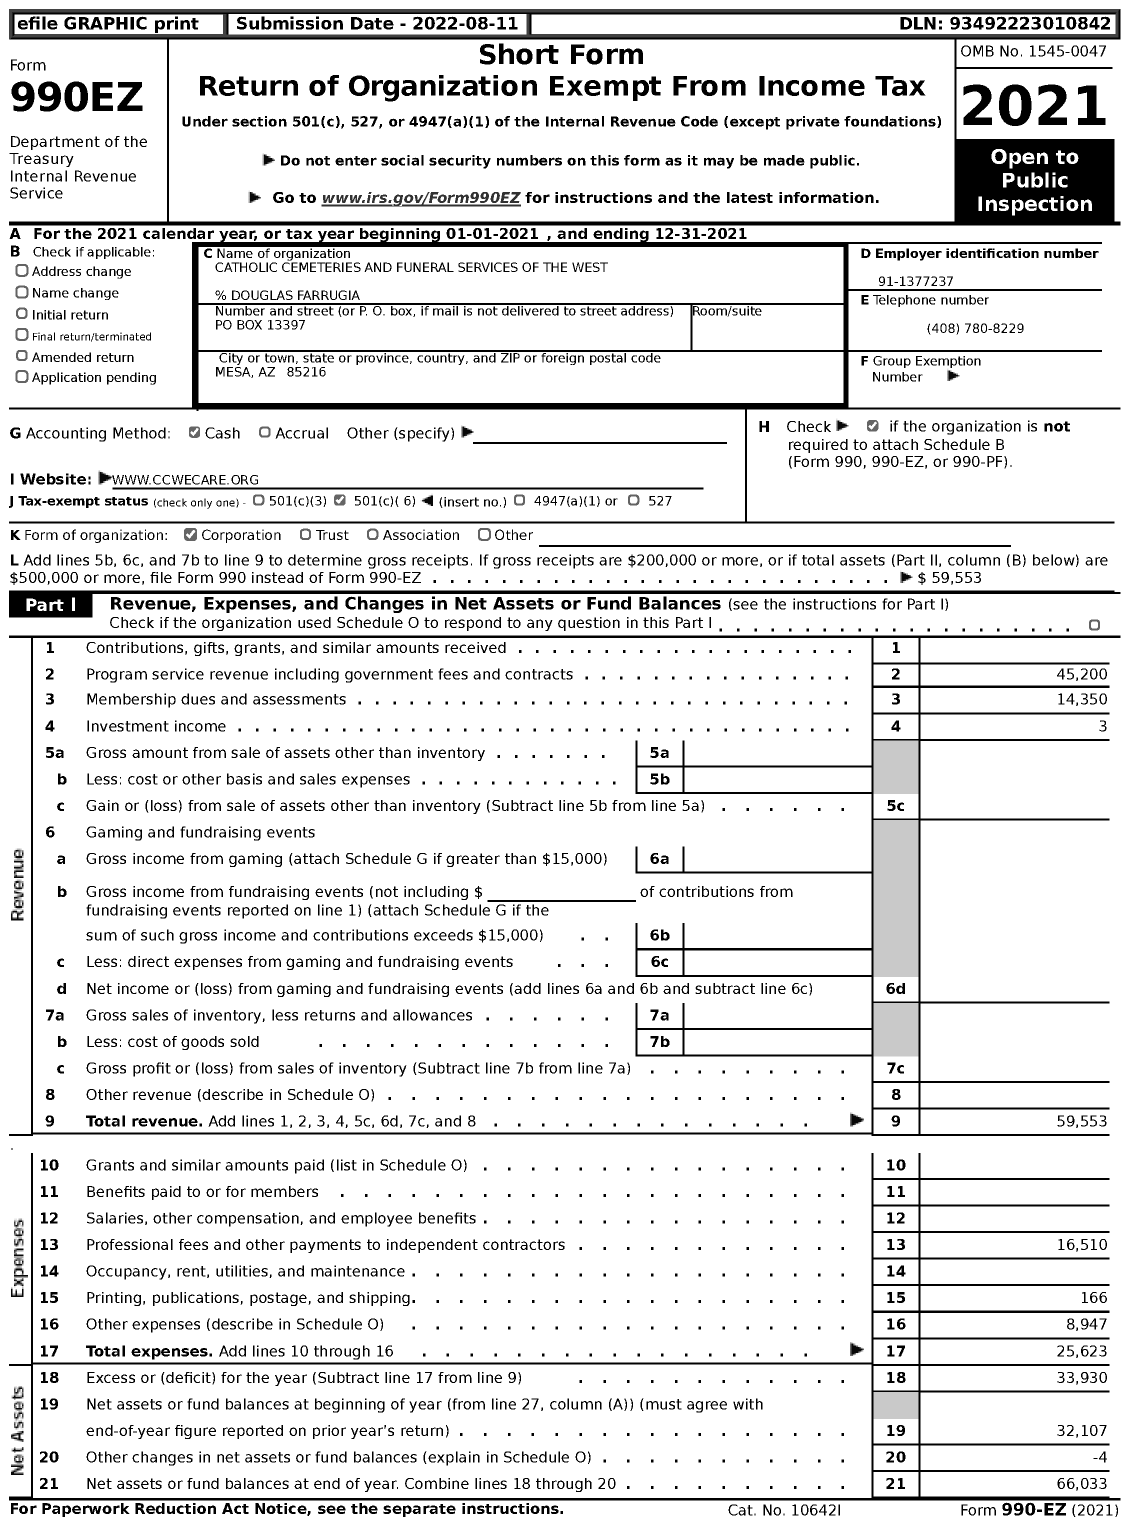 Image of first page of 2021 Form 990EZ for Catholic Cemeteries and Funeral Services of the West